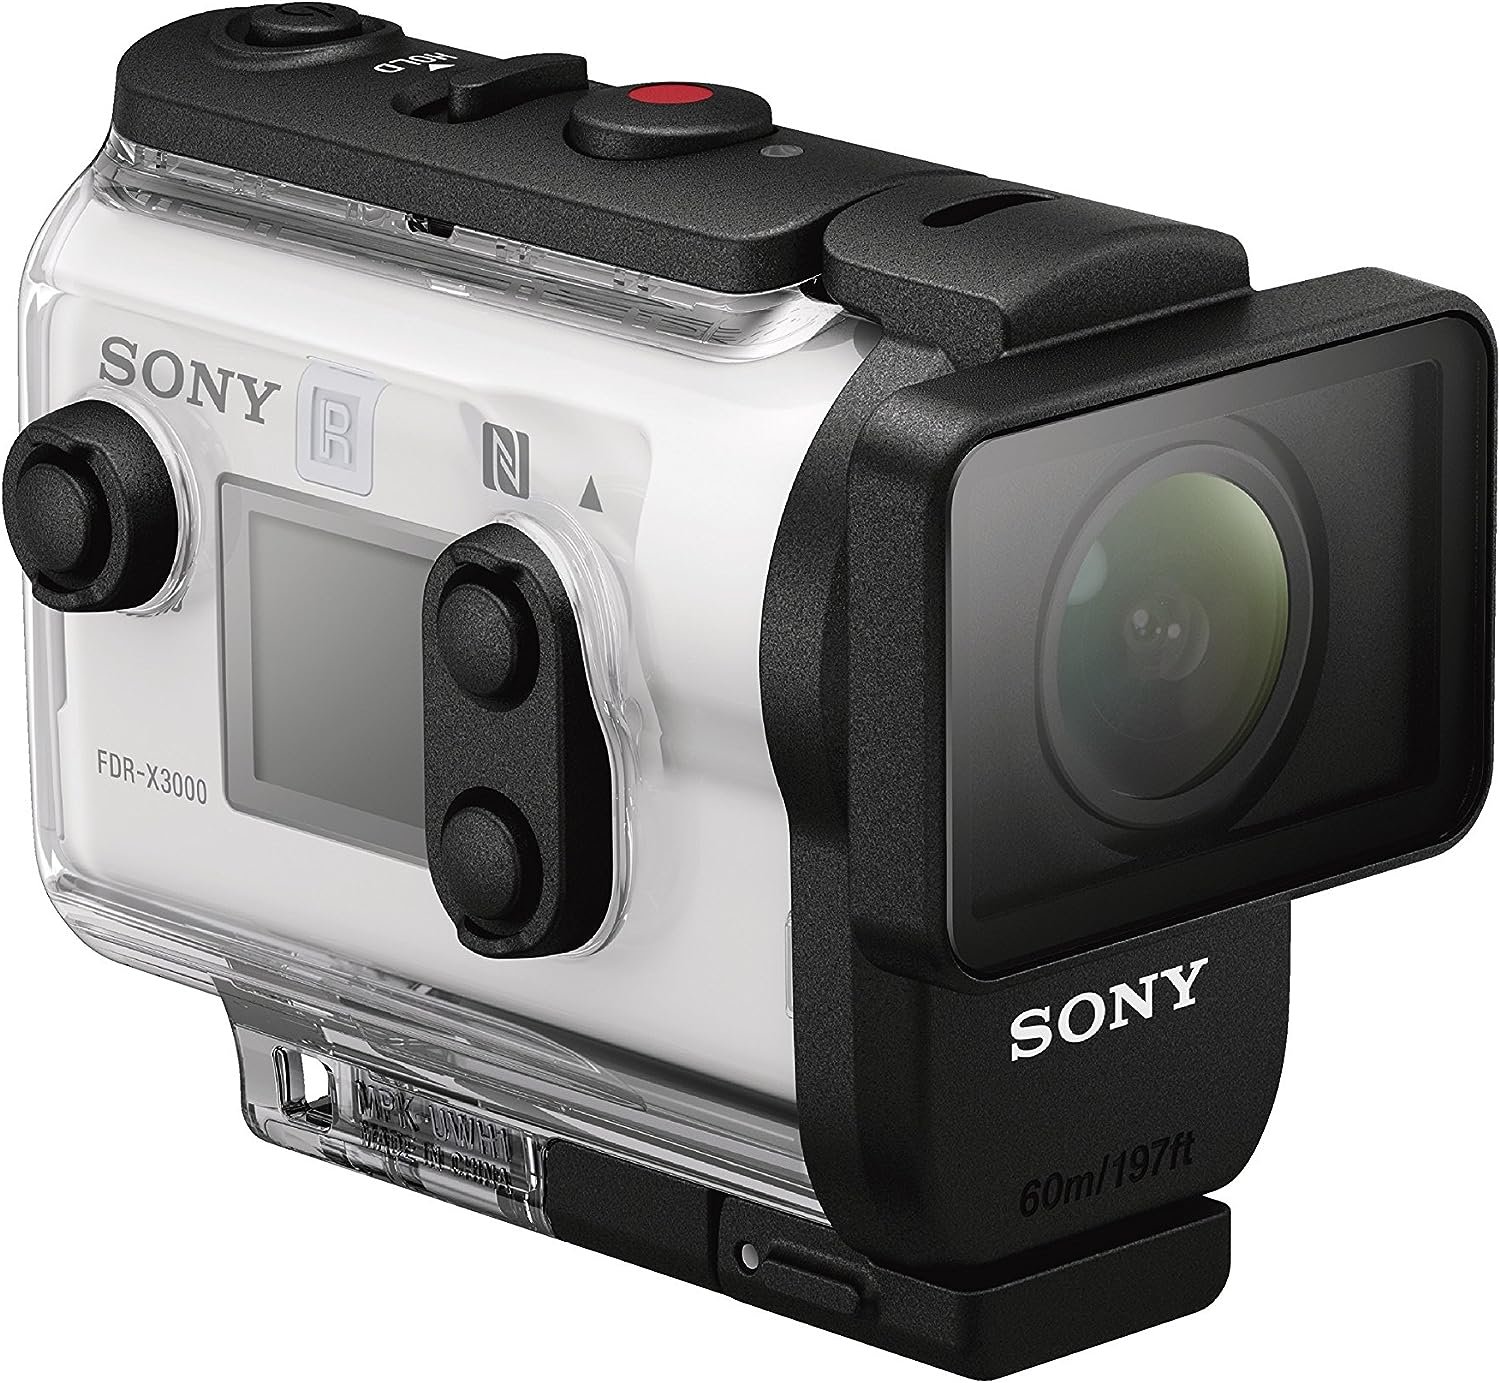 Sony FDR-X3000 -Is it the Best YouTube Vlogging Camera